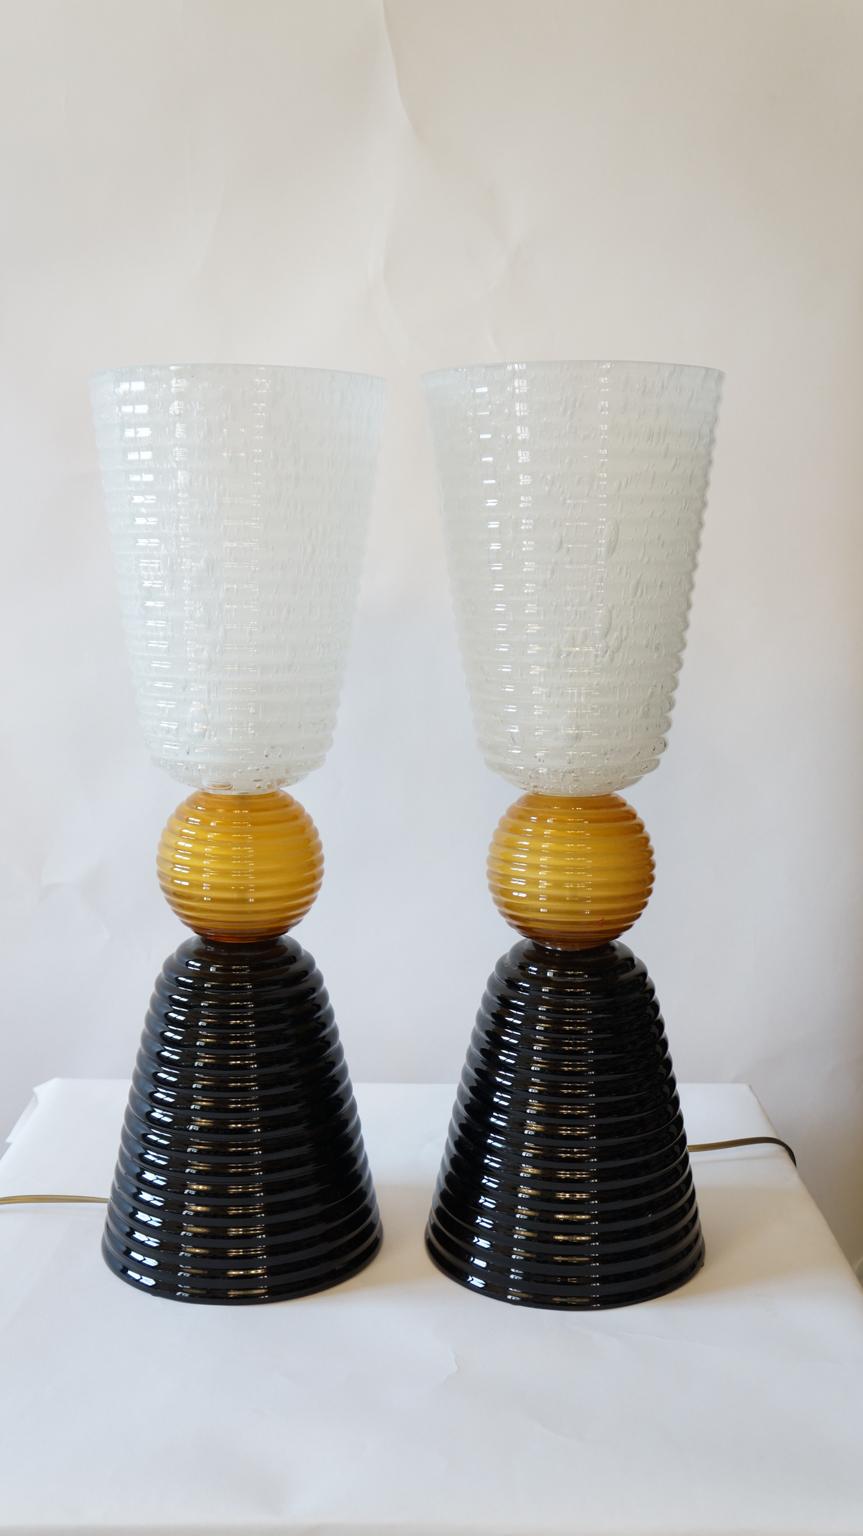 The lamp you can see in the picture is very simple but impressive. It is precisely the striking complementarity
between black and white, divided by amber, that makes it so elegant. It develops with two symmetrical cups divided by a ribbed sphere.